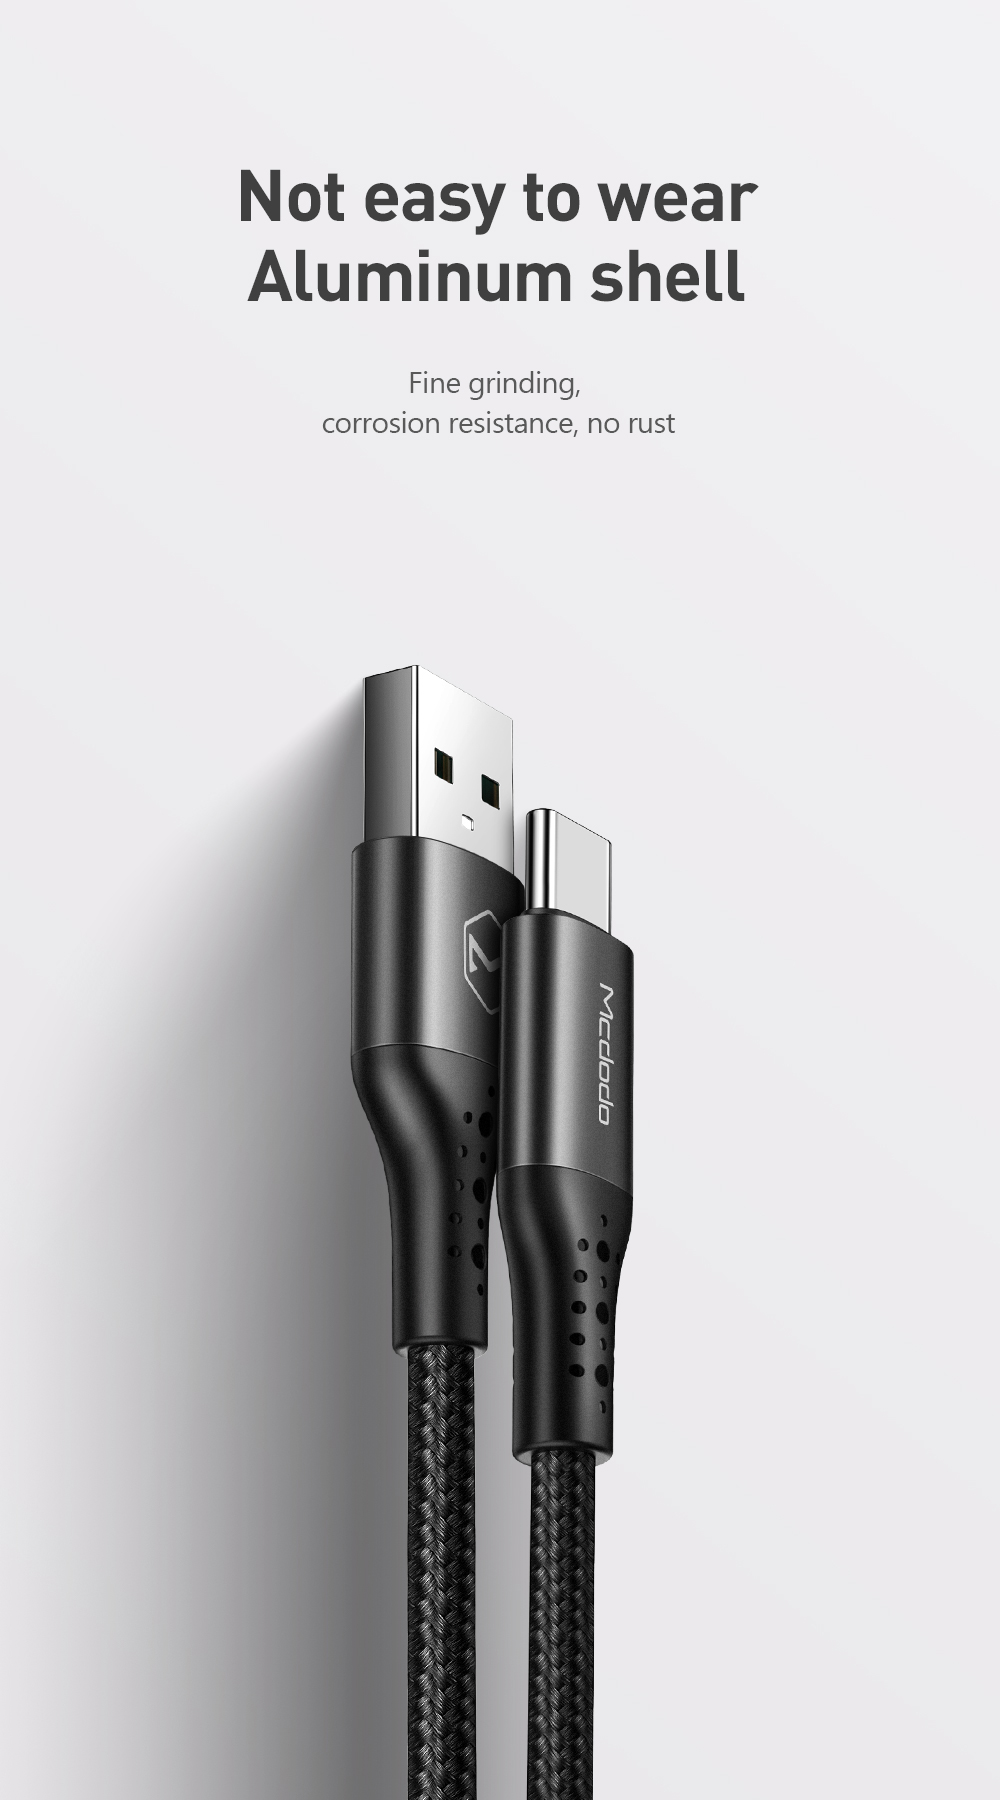 MCDODO-40W-5A-VOOC-Warp-Super-Fast-Charge-USB-Type-C-Cable-Support-QC30-AFC-SCP-Protocols-Data-Sync--1716360-8